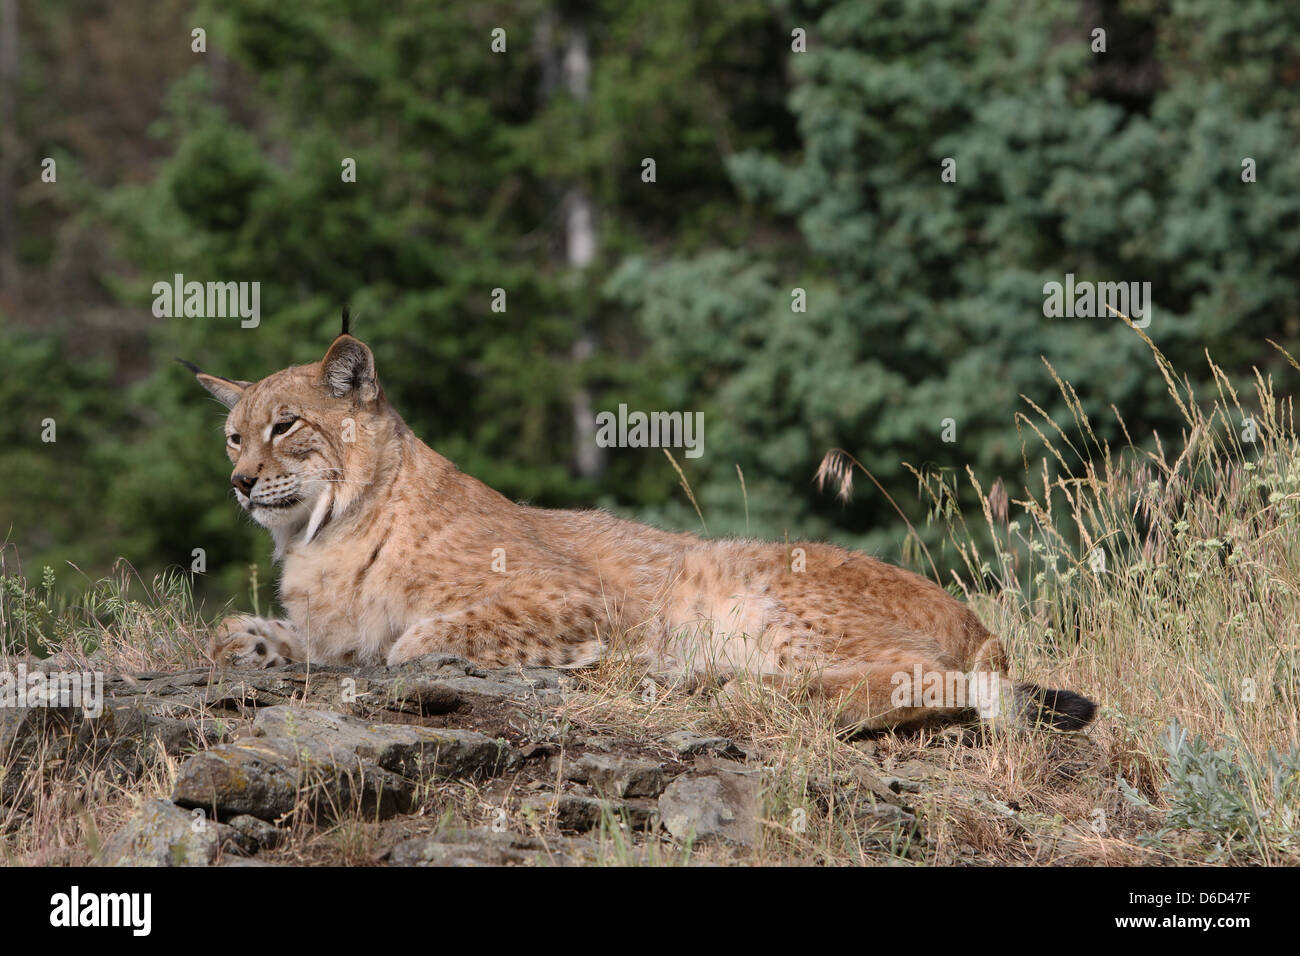 Savannah Lynx High Resolution Stock Photography and Images - Alamy